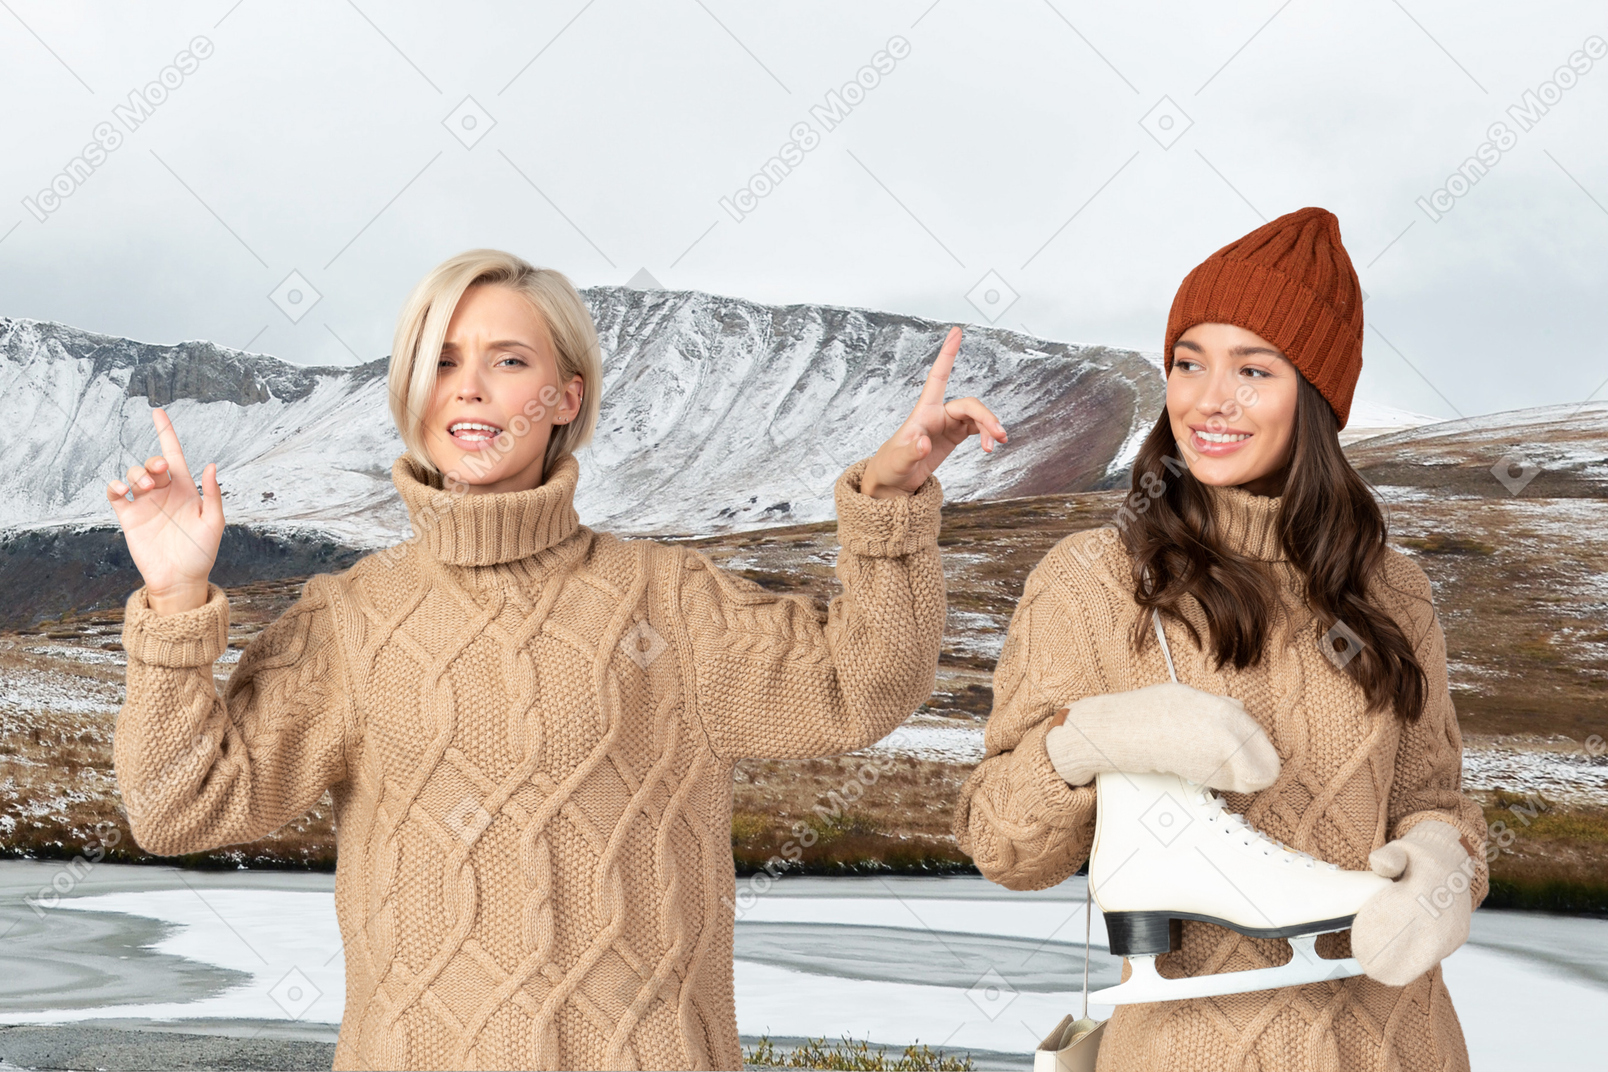 Funny female friends are about to iceskate in mountains